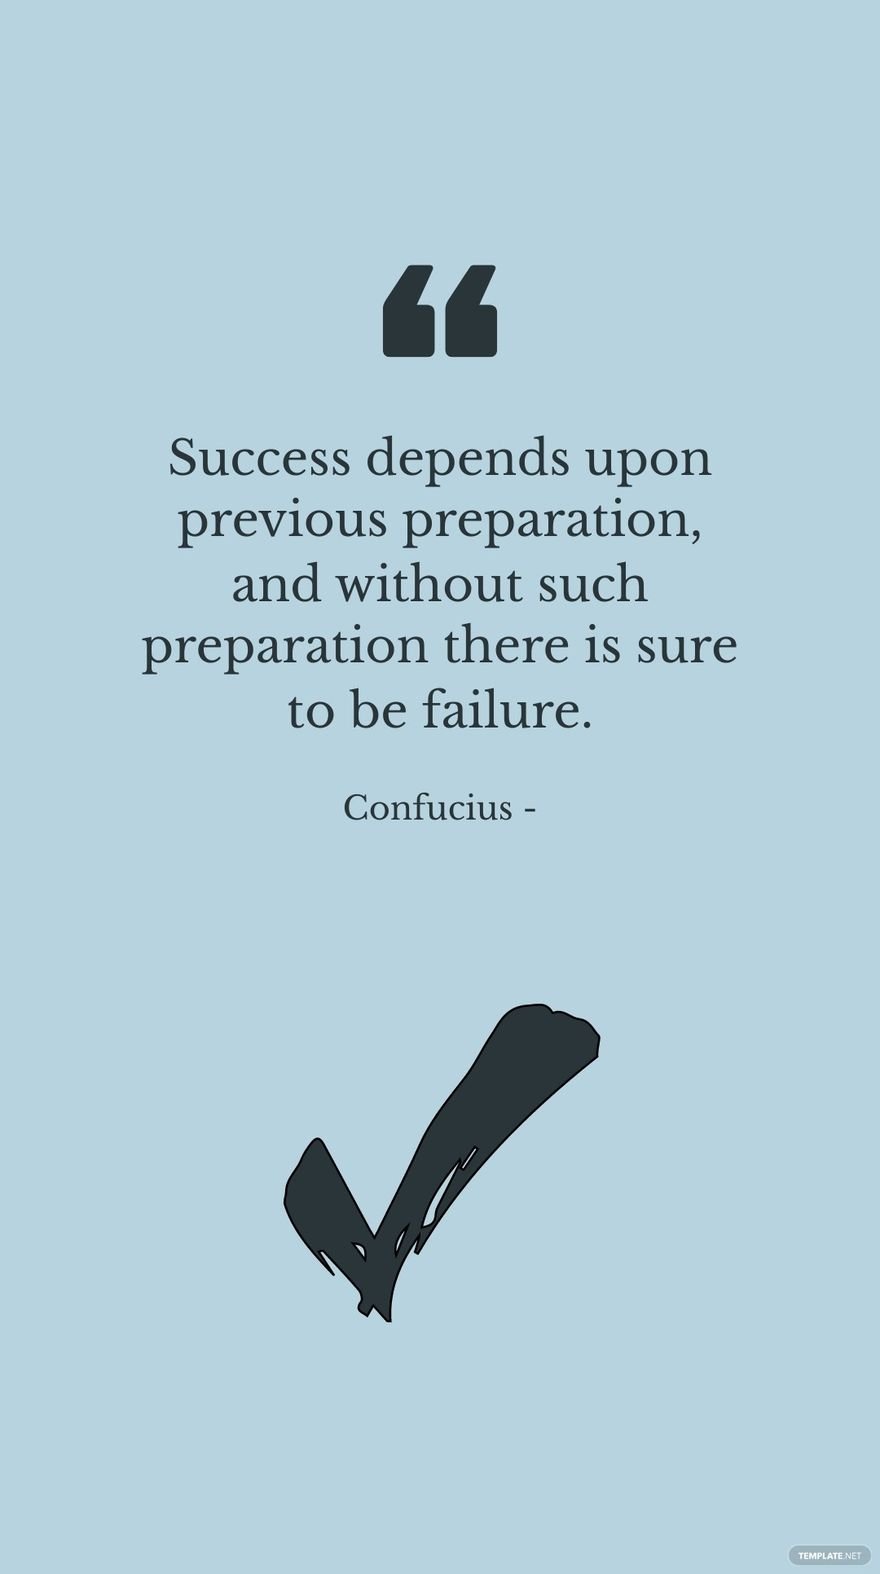 Confucius - Success depends upon previous preparation, and without such preparation there is sure to be failure. in JPG